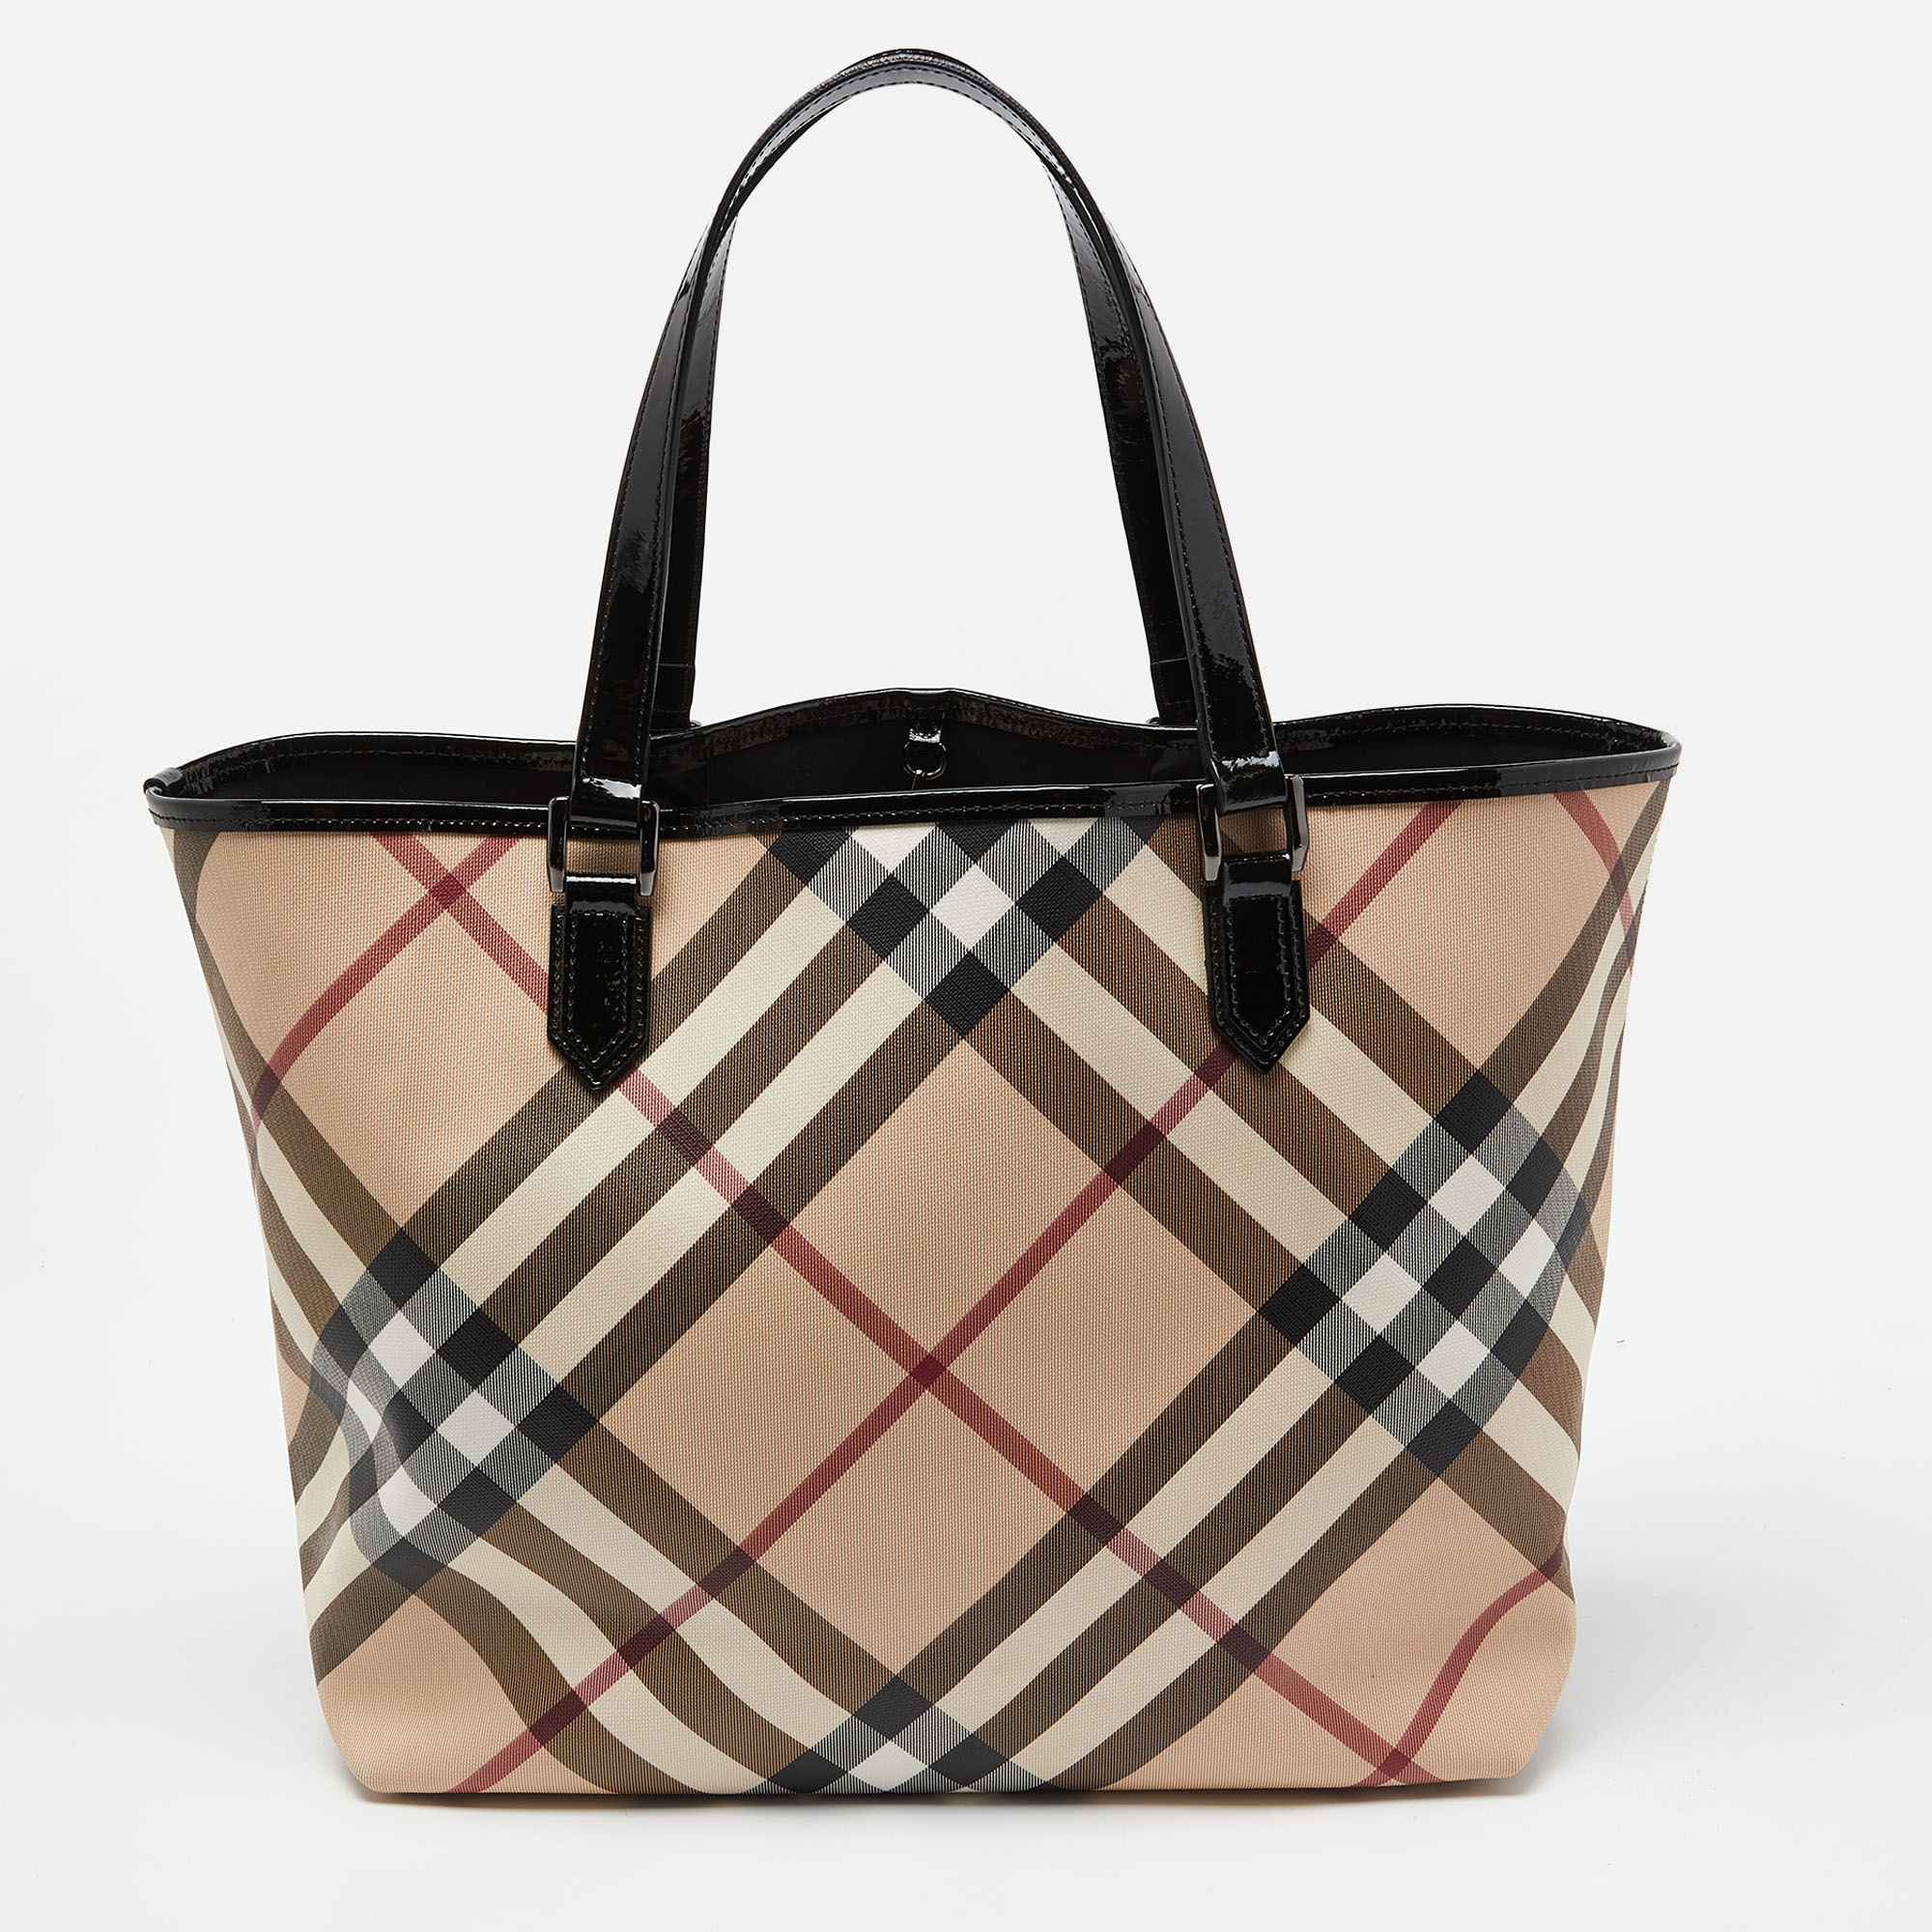 Burberry Black/Beige Super Nova Check PVC And Patent Leather Large Nickie Tote